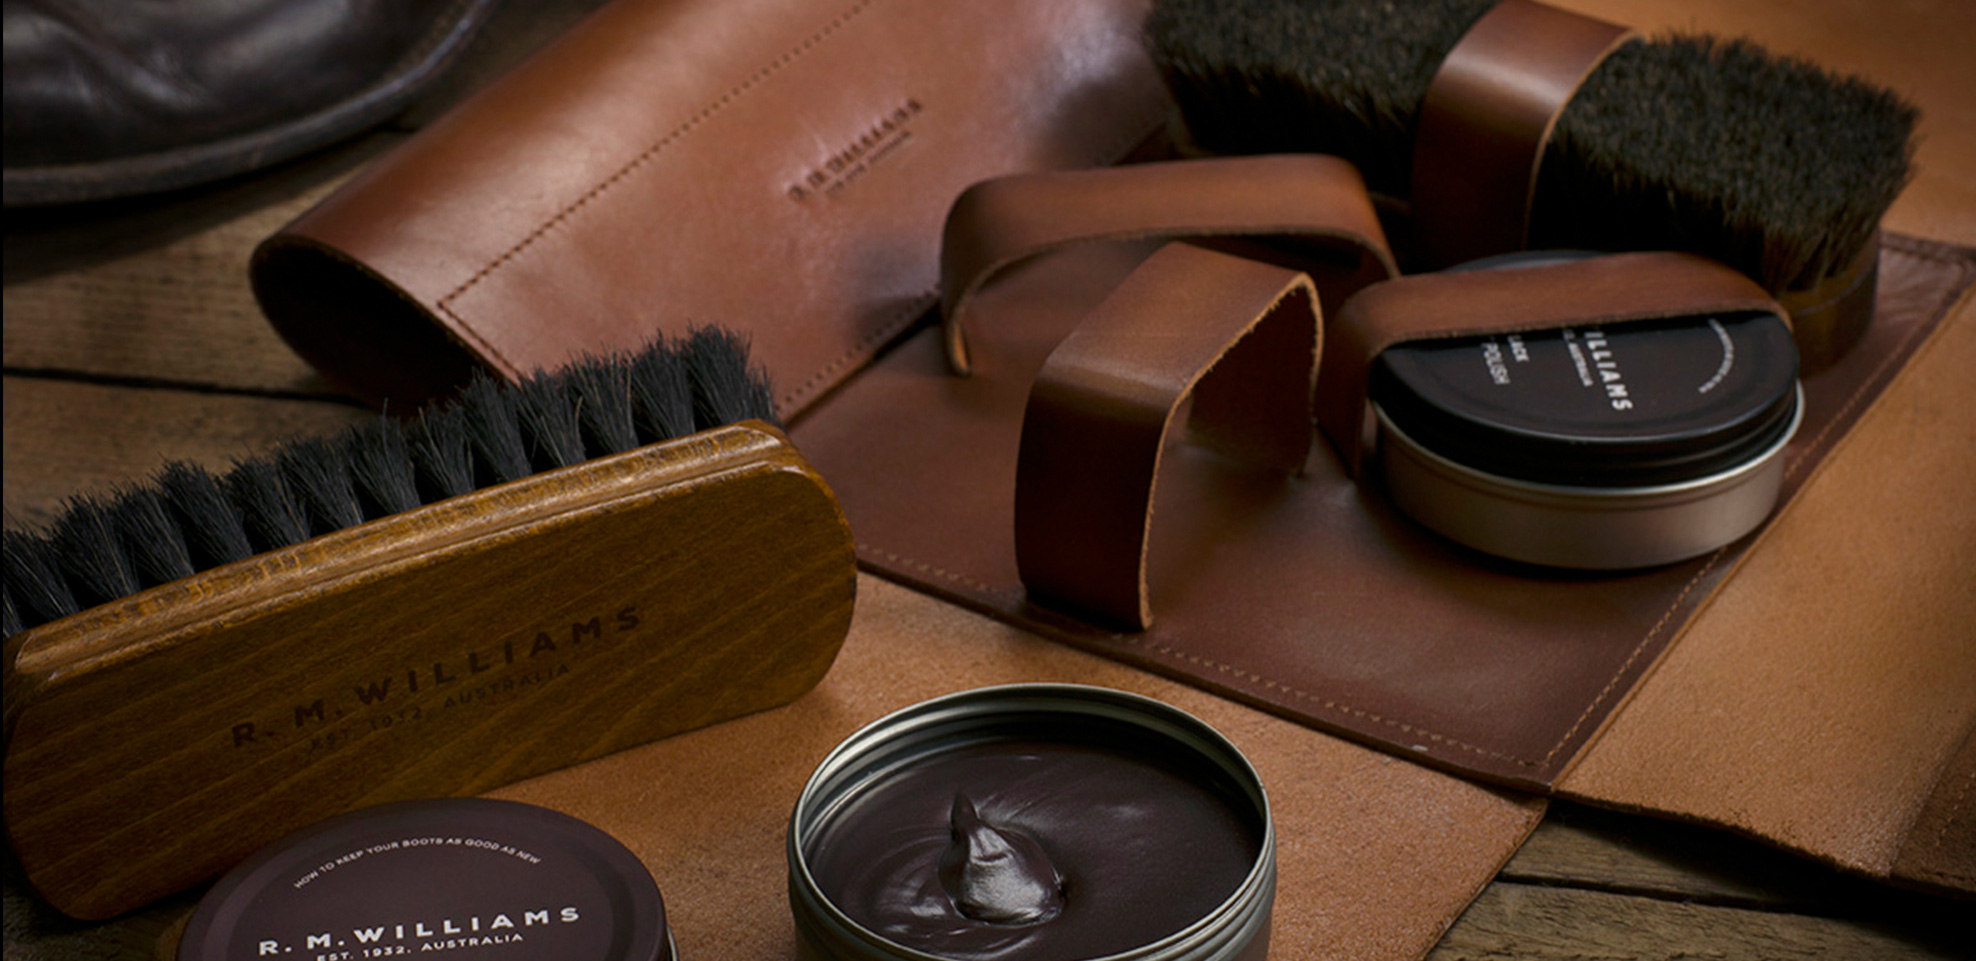 leather conditioner rm williams